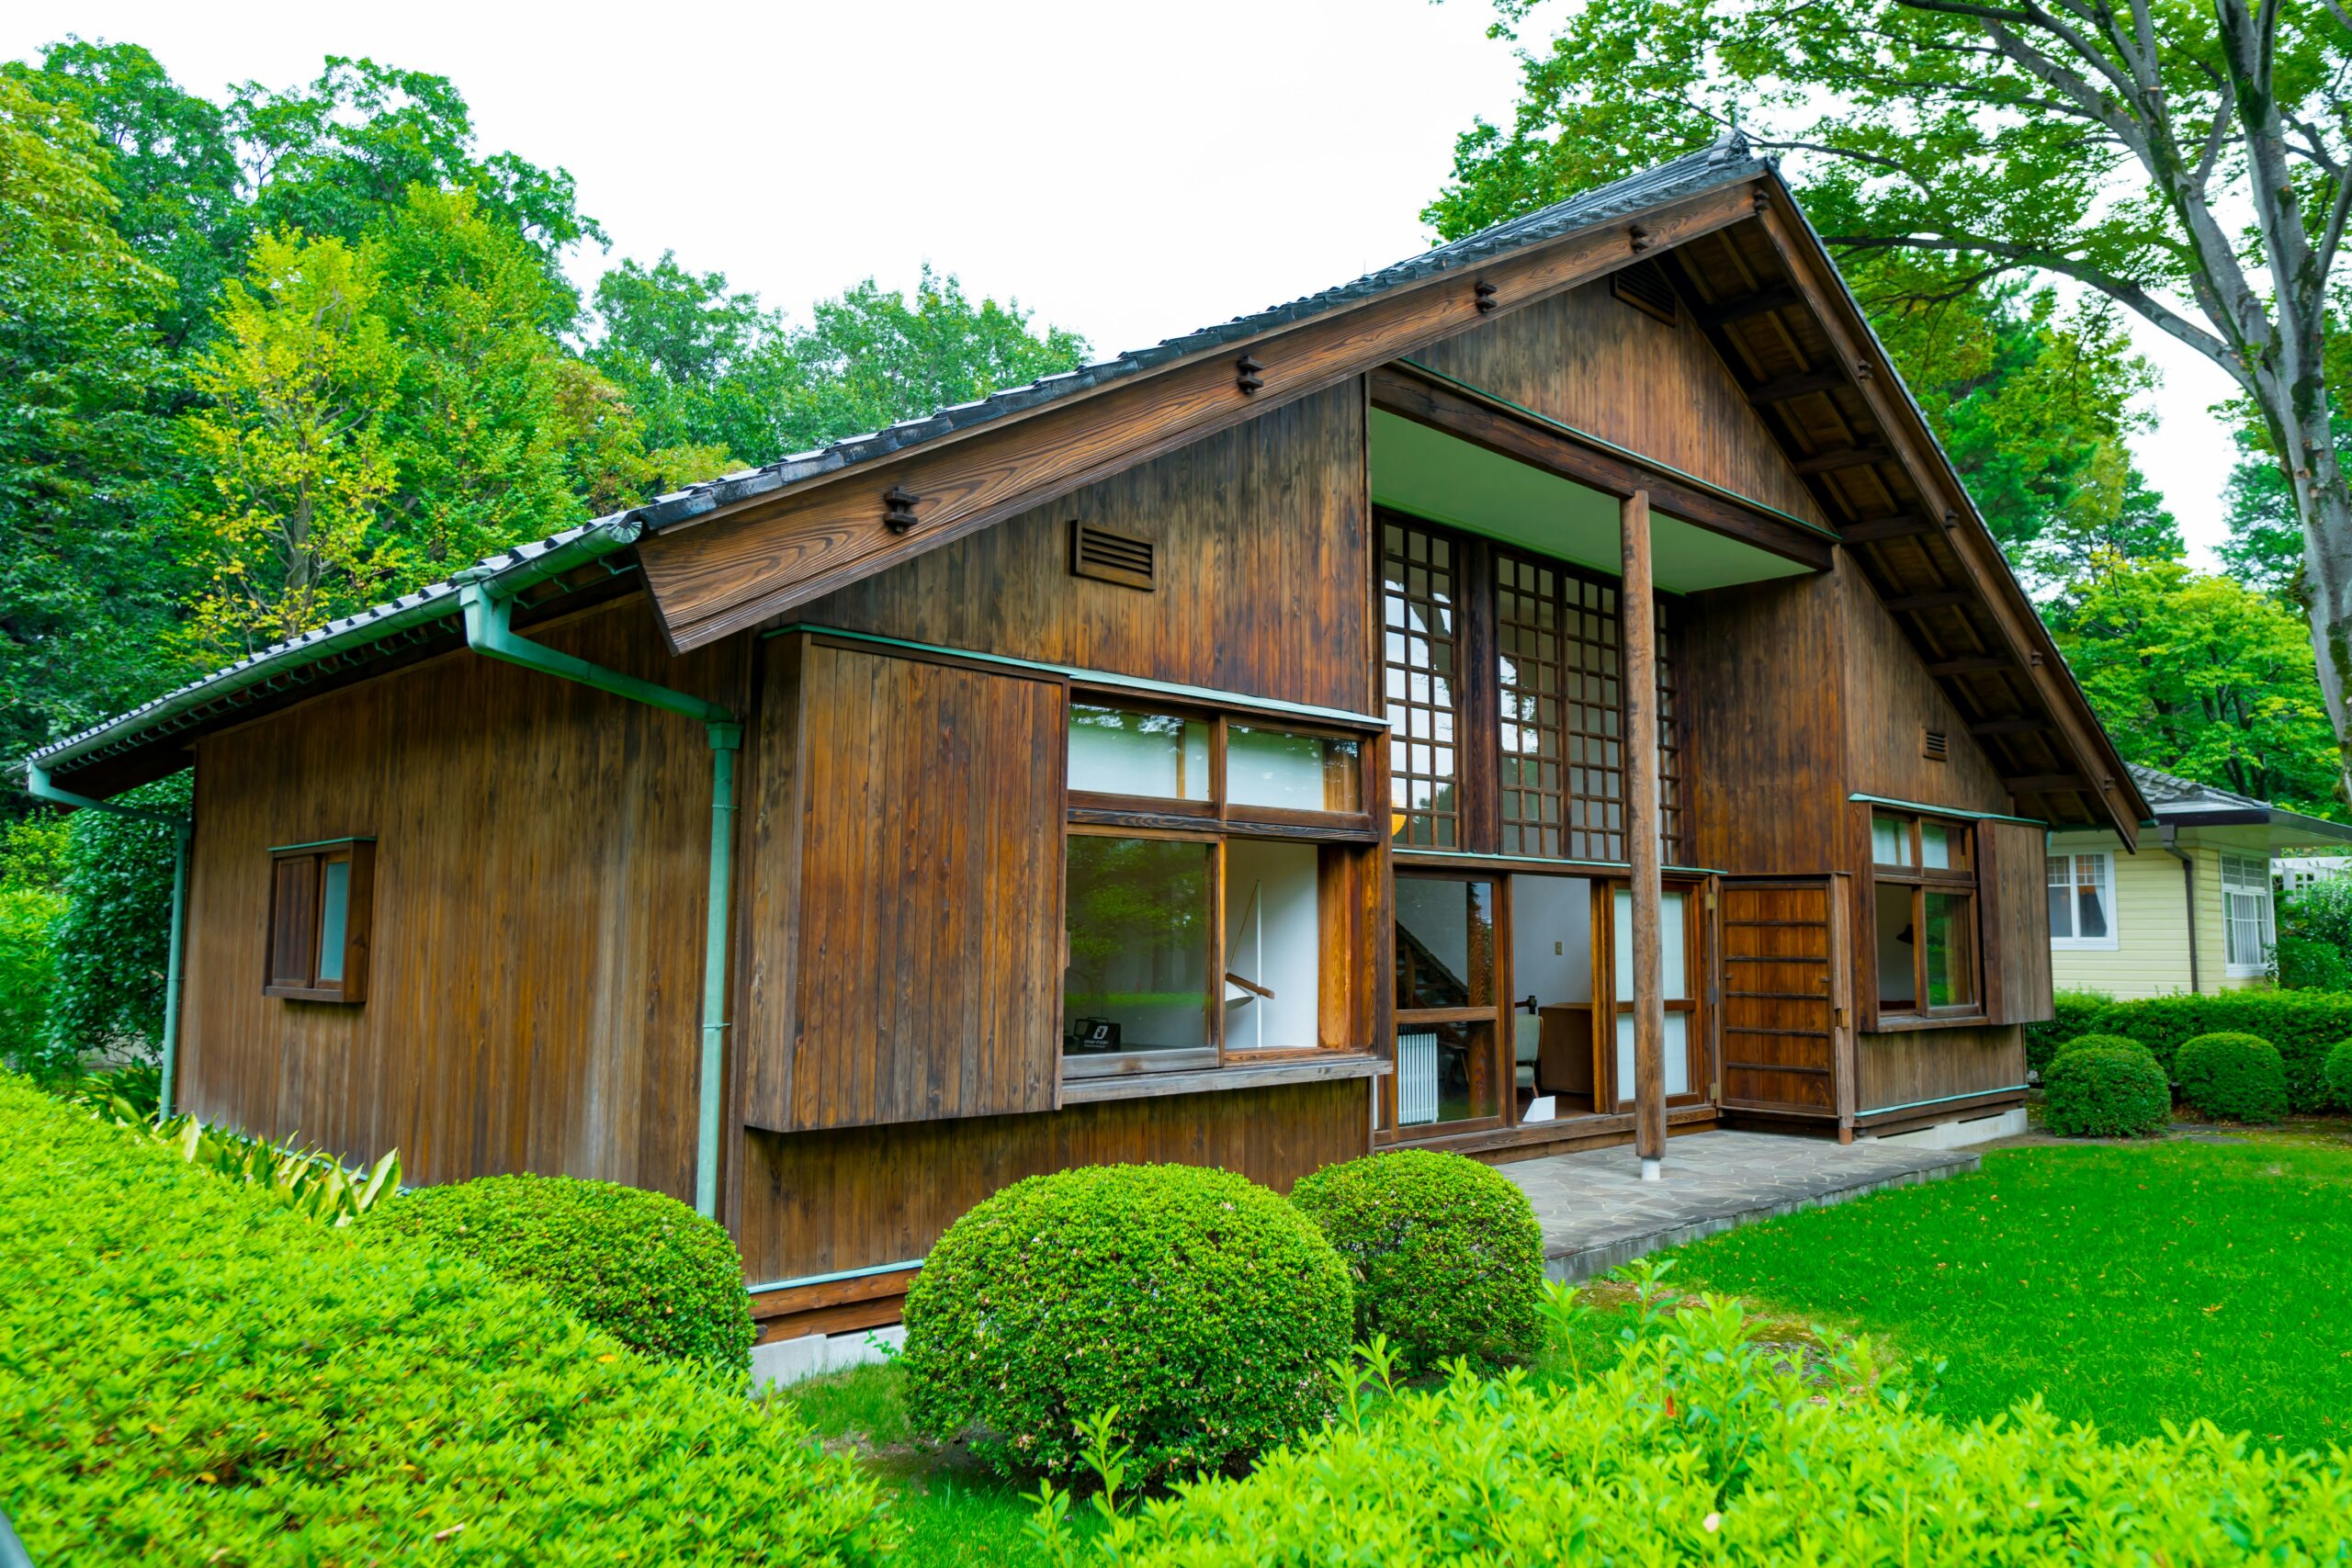 a small wooden house with a green lawn